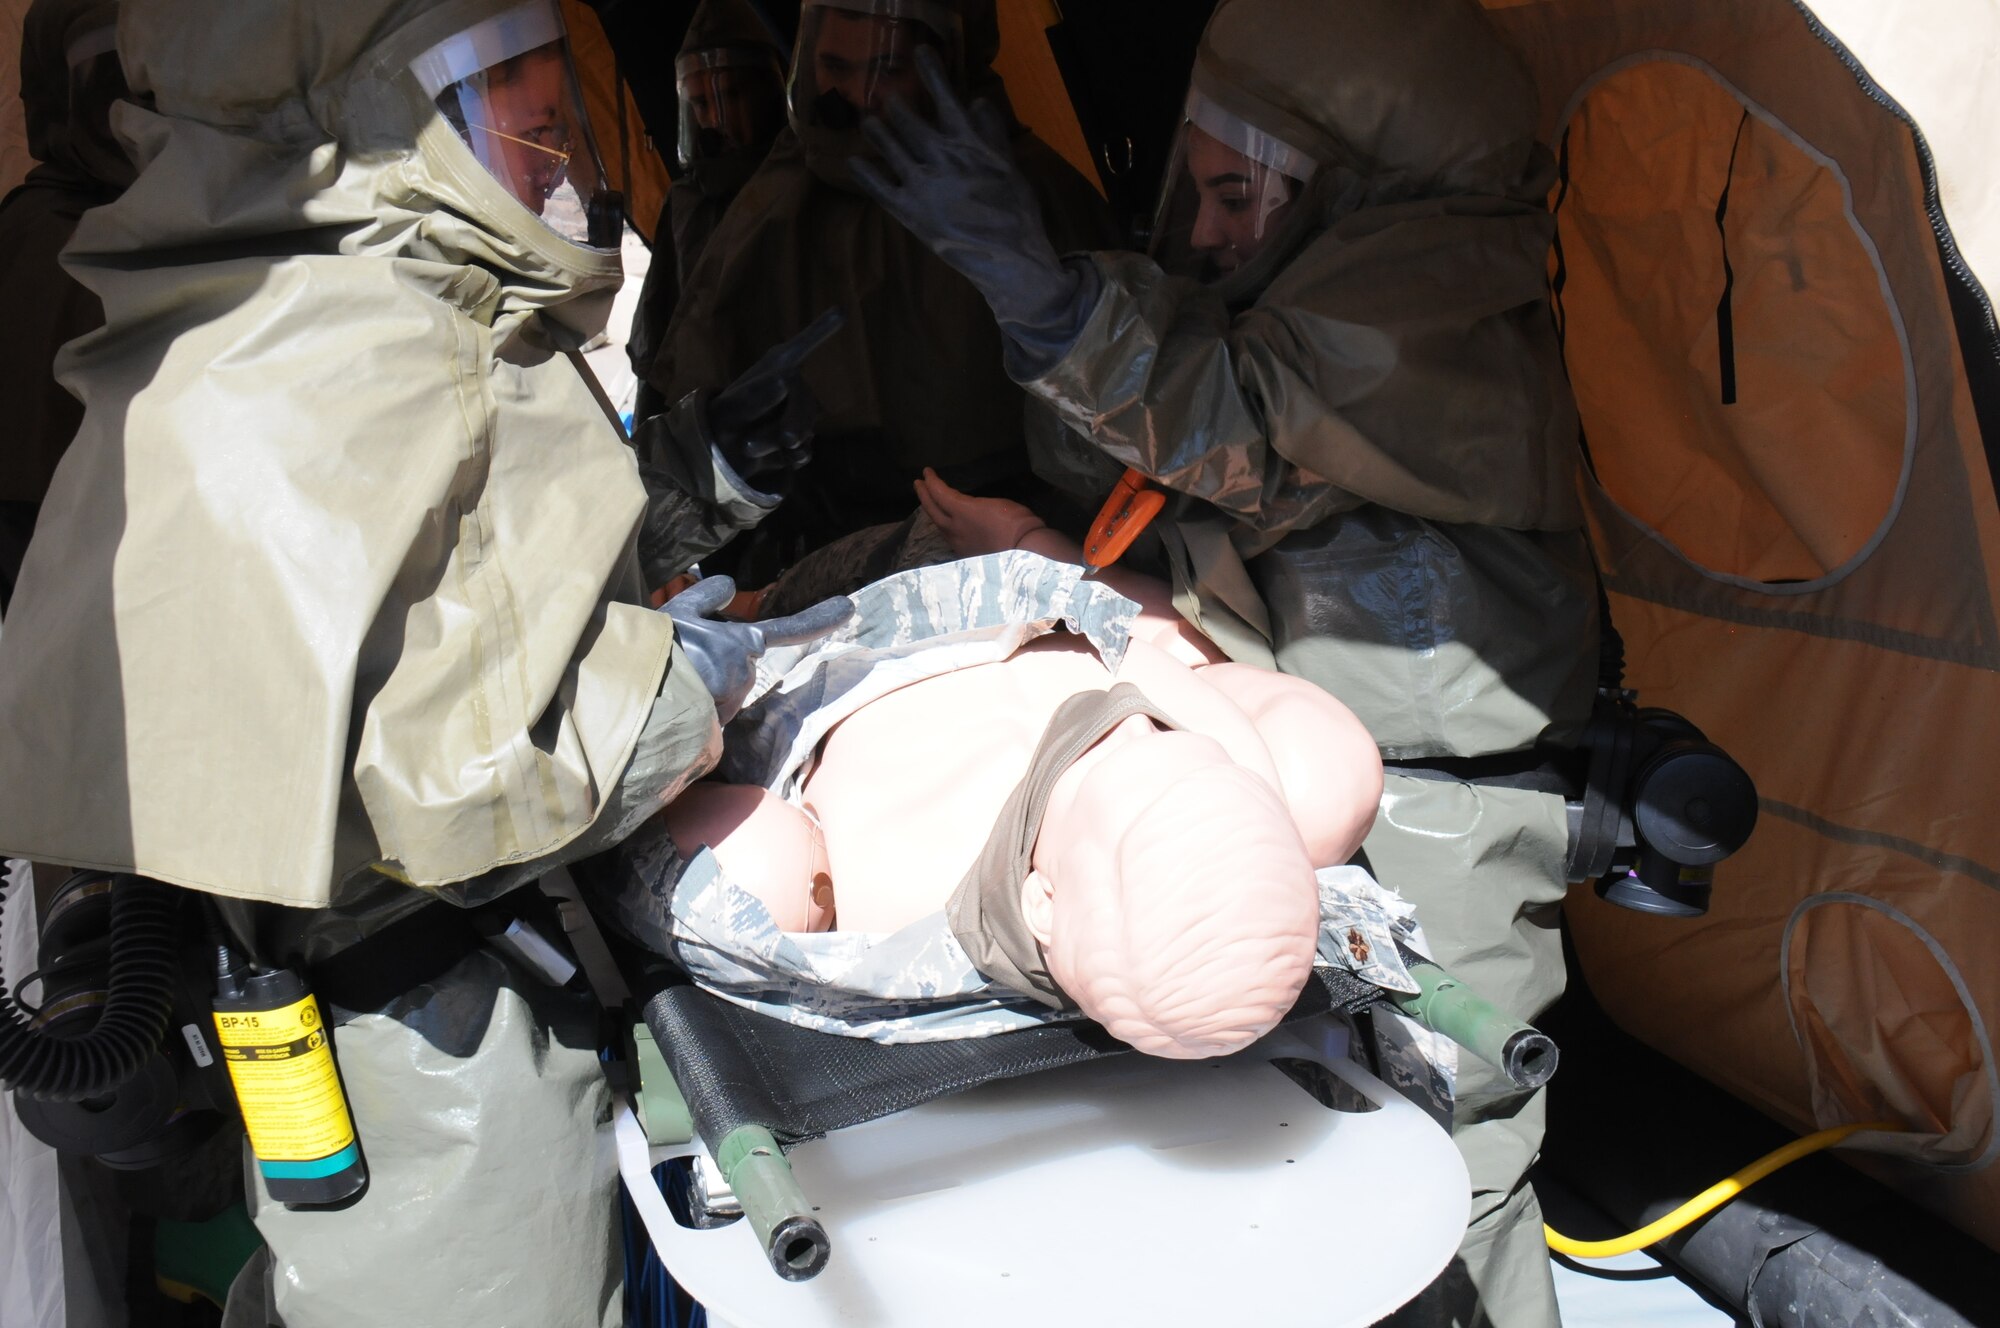 Military medical teams decontaminates a simulated patient